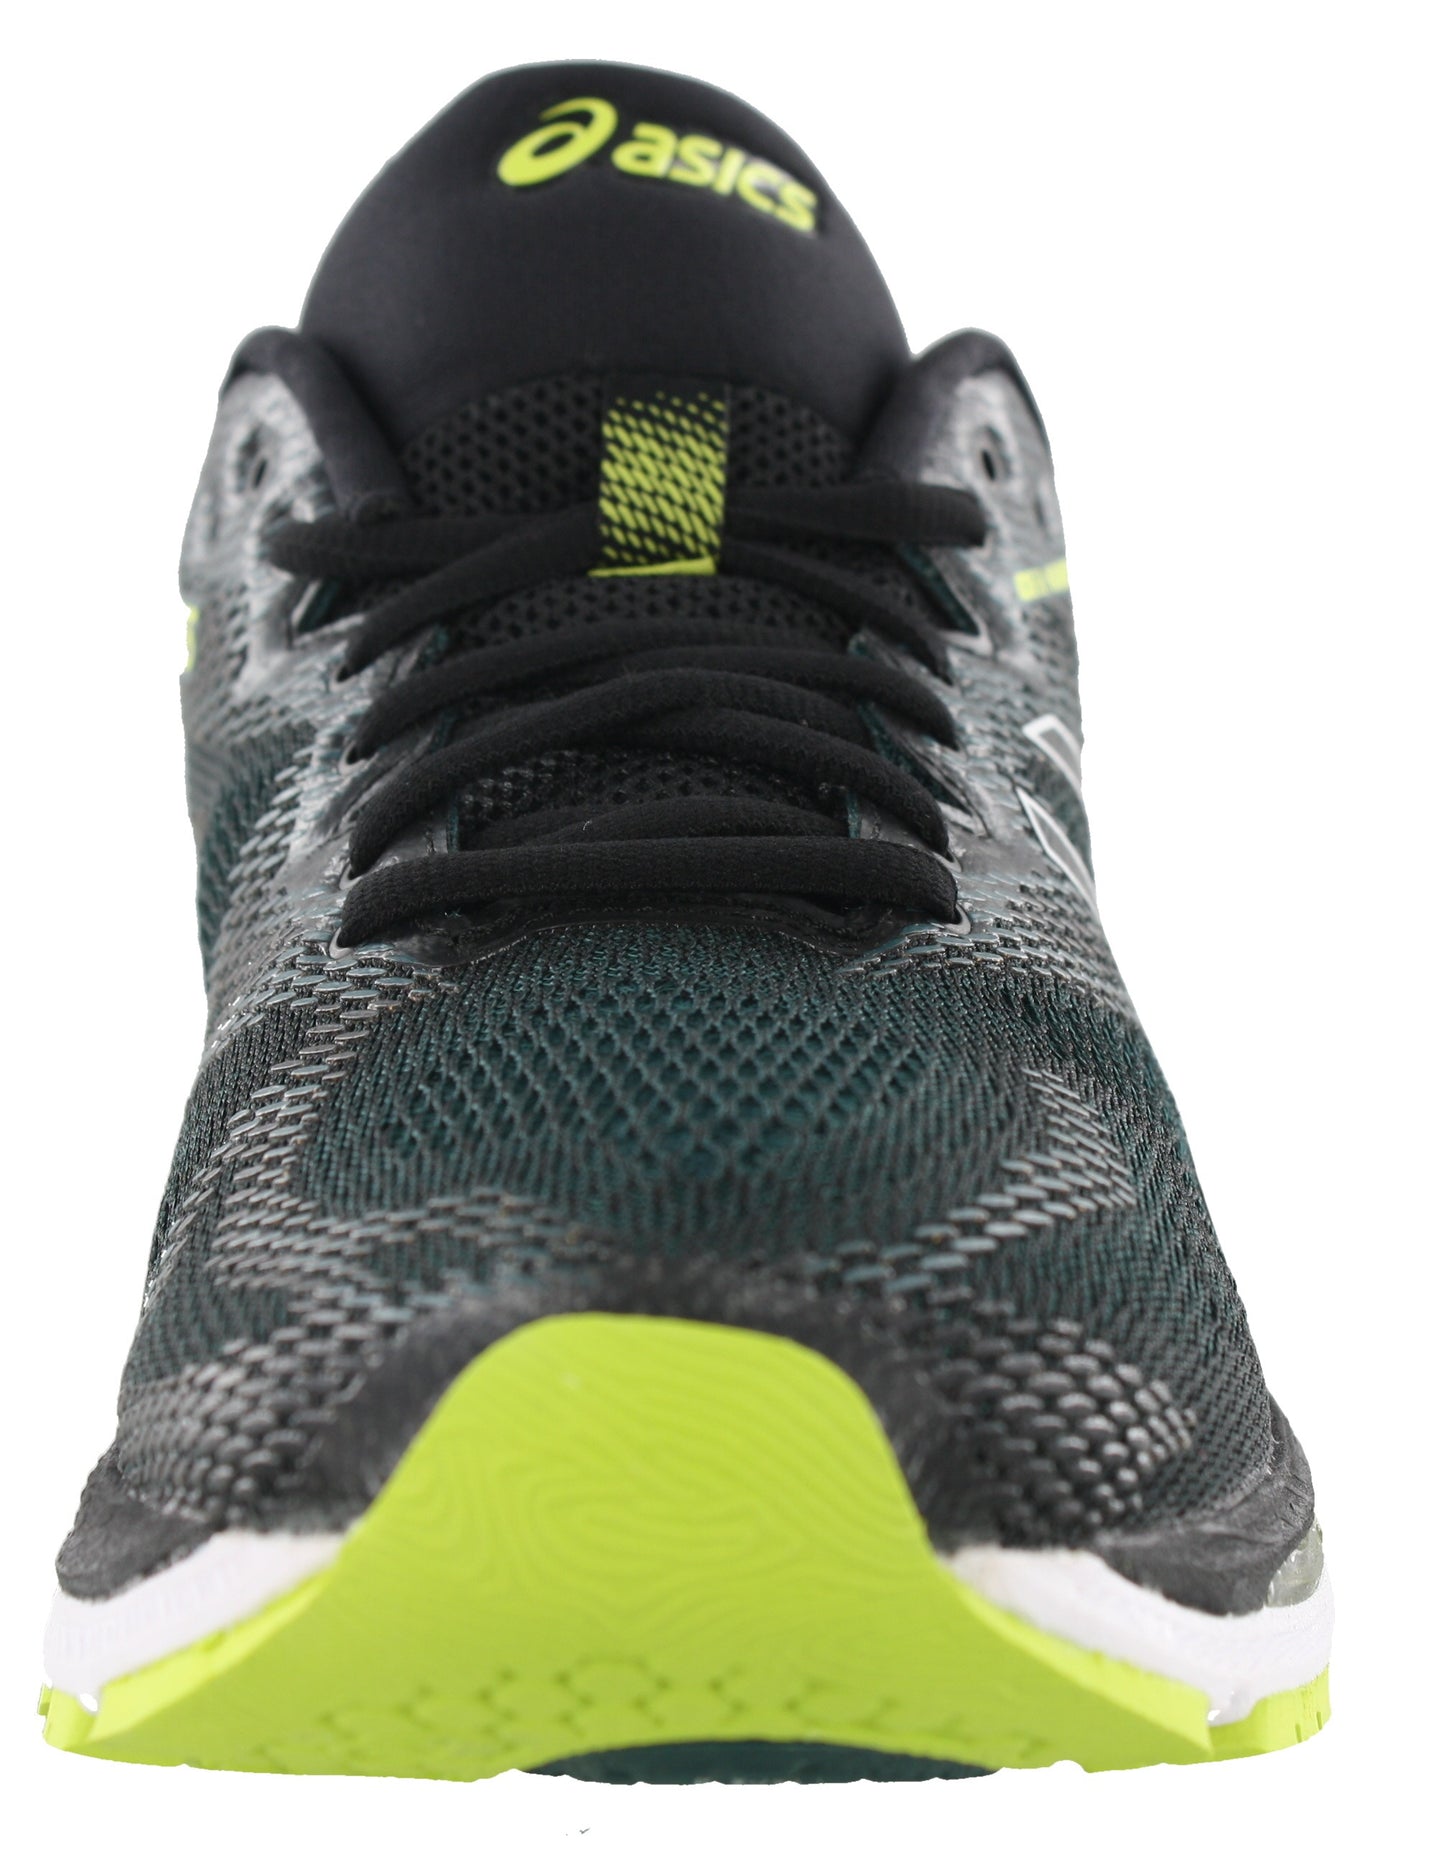 
                  
                    Front of Black with Neon Lime, Forest Green, and White accents ASICS Men Walking Trail Cushioned Running Shoes Gel Nimbus 20
                  
                